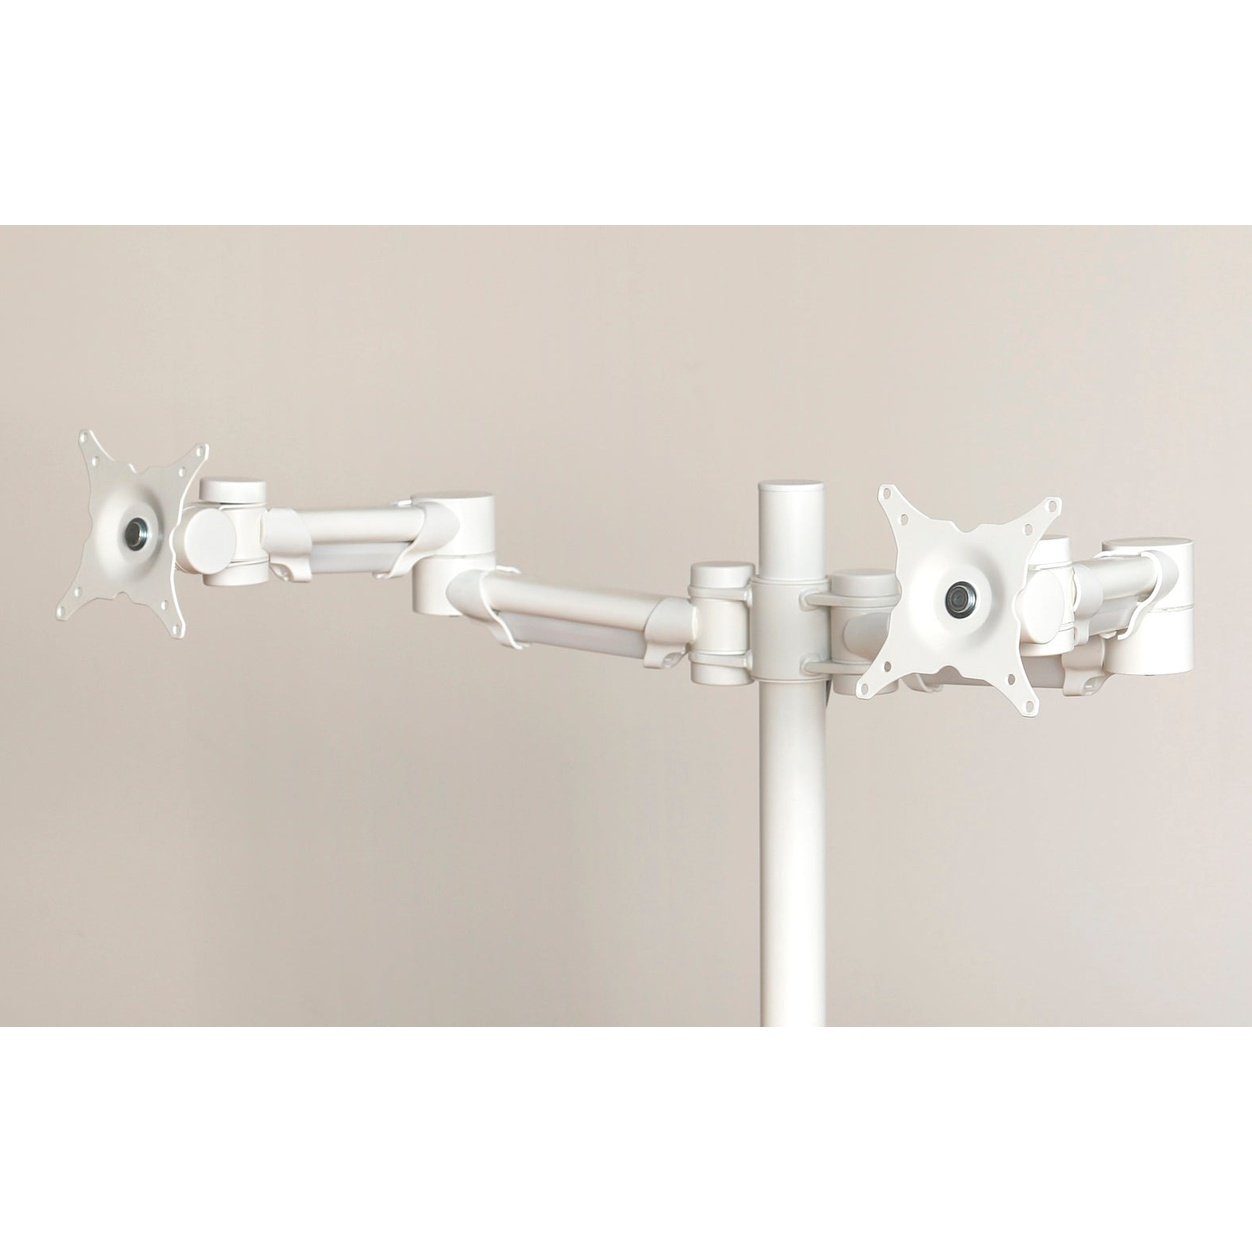 Impulse Double Height Adjustable Flat Screen Monitor Arm - Steel, Self-Assembly, 420mm Height, 1-Year Guarantee